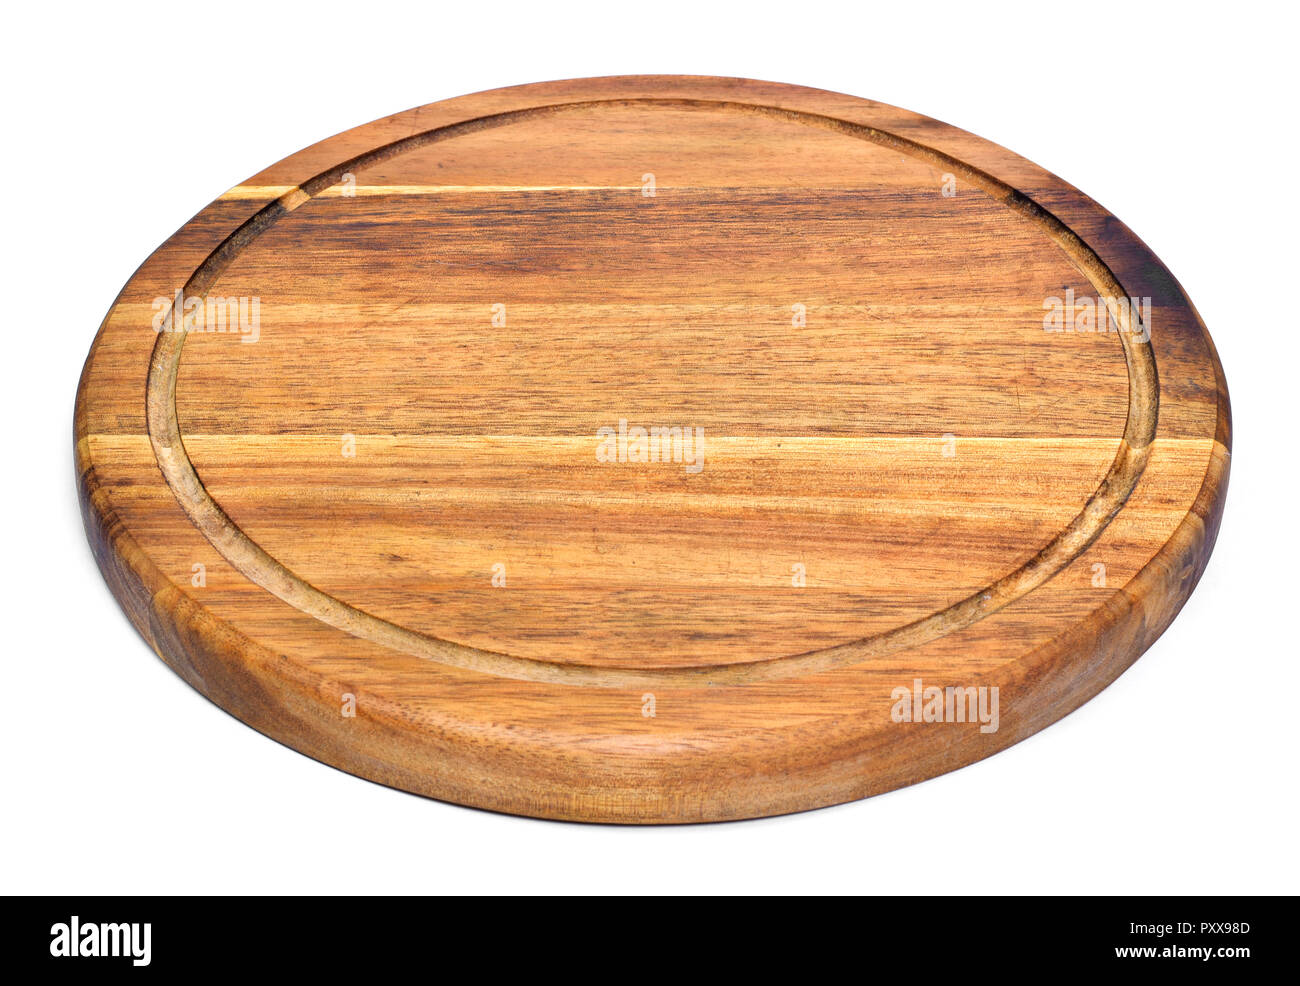 Wooden cutting board with copy space. design element, isolated on white background. Wood texture, old wood board. Stock Photo